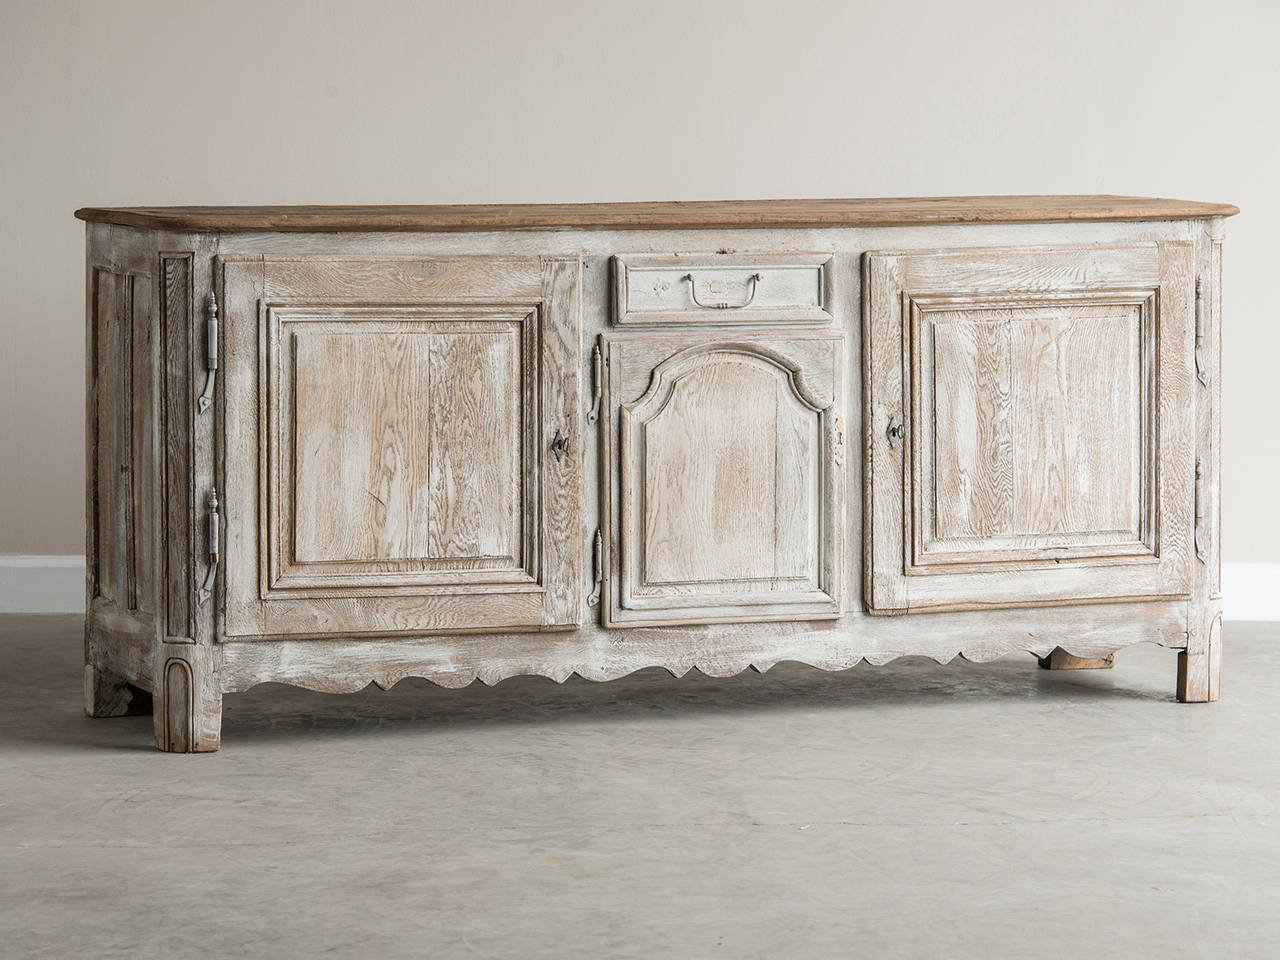 Régence painted oak buffet with three doors, France, circa 1730. The handsome simplicity of this antique French buffet is due to the symmetrical placement of the three cabinet doors with a single drawer in the centre. This elegant balance of the